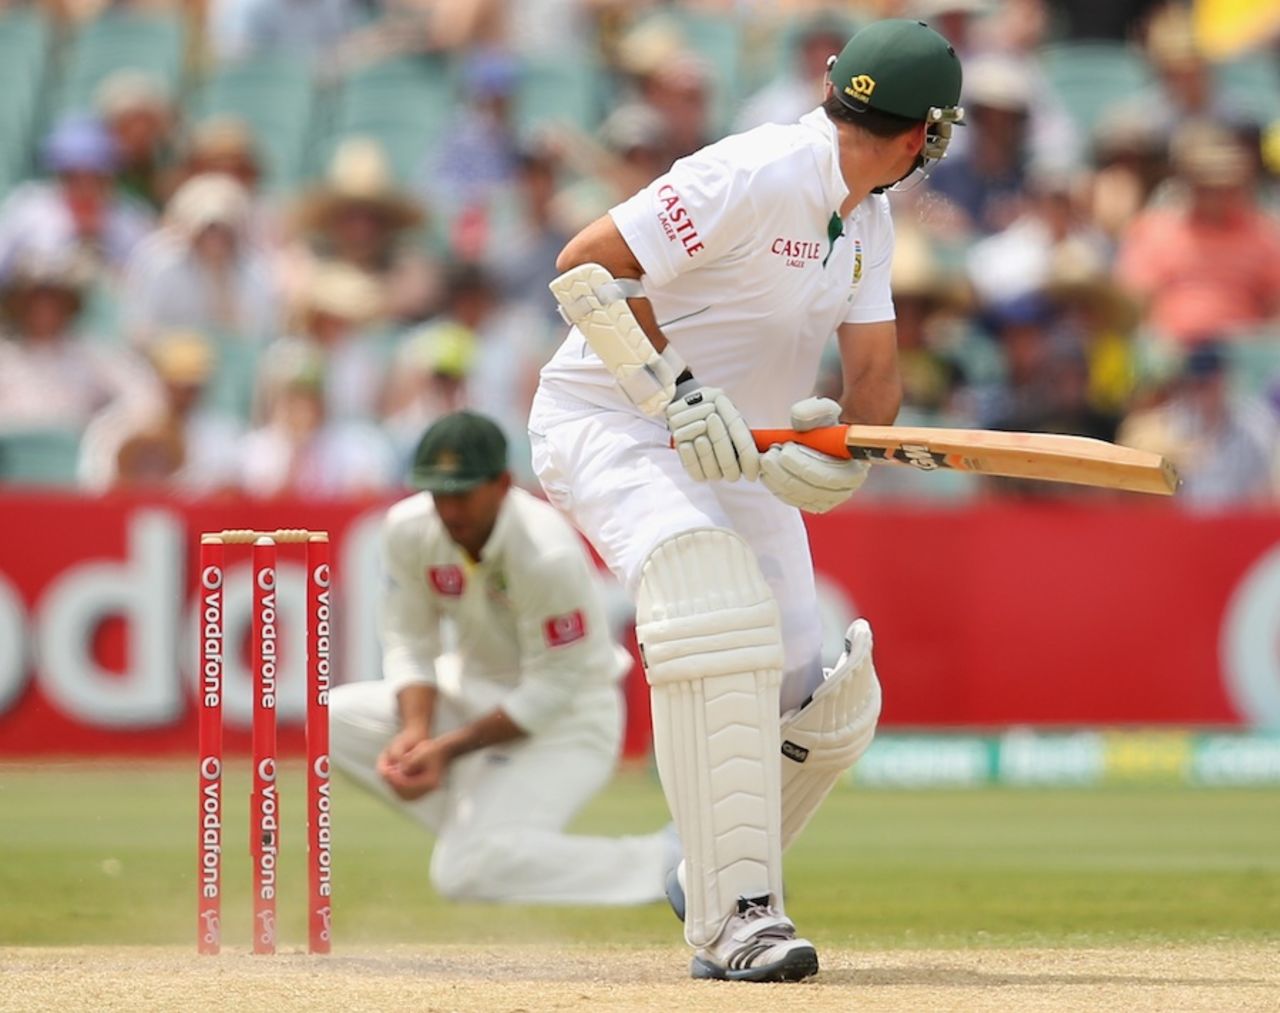 Graeme Smith was caught at slip for a duck in the first over, Australia v South Africa, 2nd Test, Adelaide, 4th day, November 25, 2012